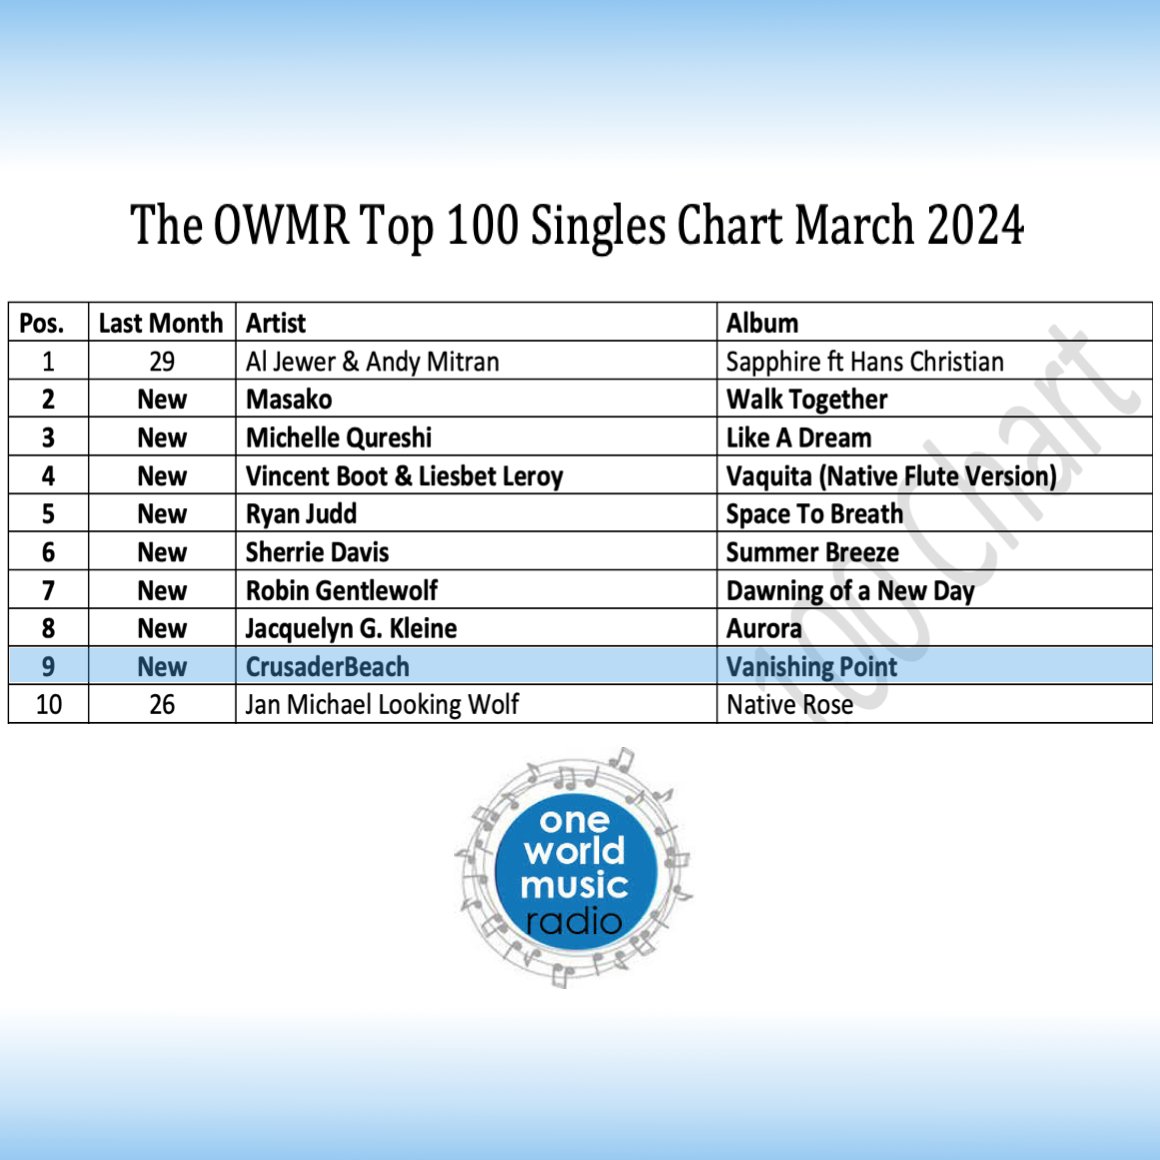 Delighted to see my piano track 'Vanishing Point' make it into the Top 10 of the One World Music Radio single charts for March. 🙌 Thanks to all the listeners and presenters at @OneWorldMusicEU for your support. See the full chart here: oneworldmusicradio.com/charts #radio #chart